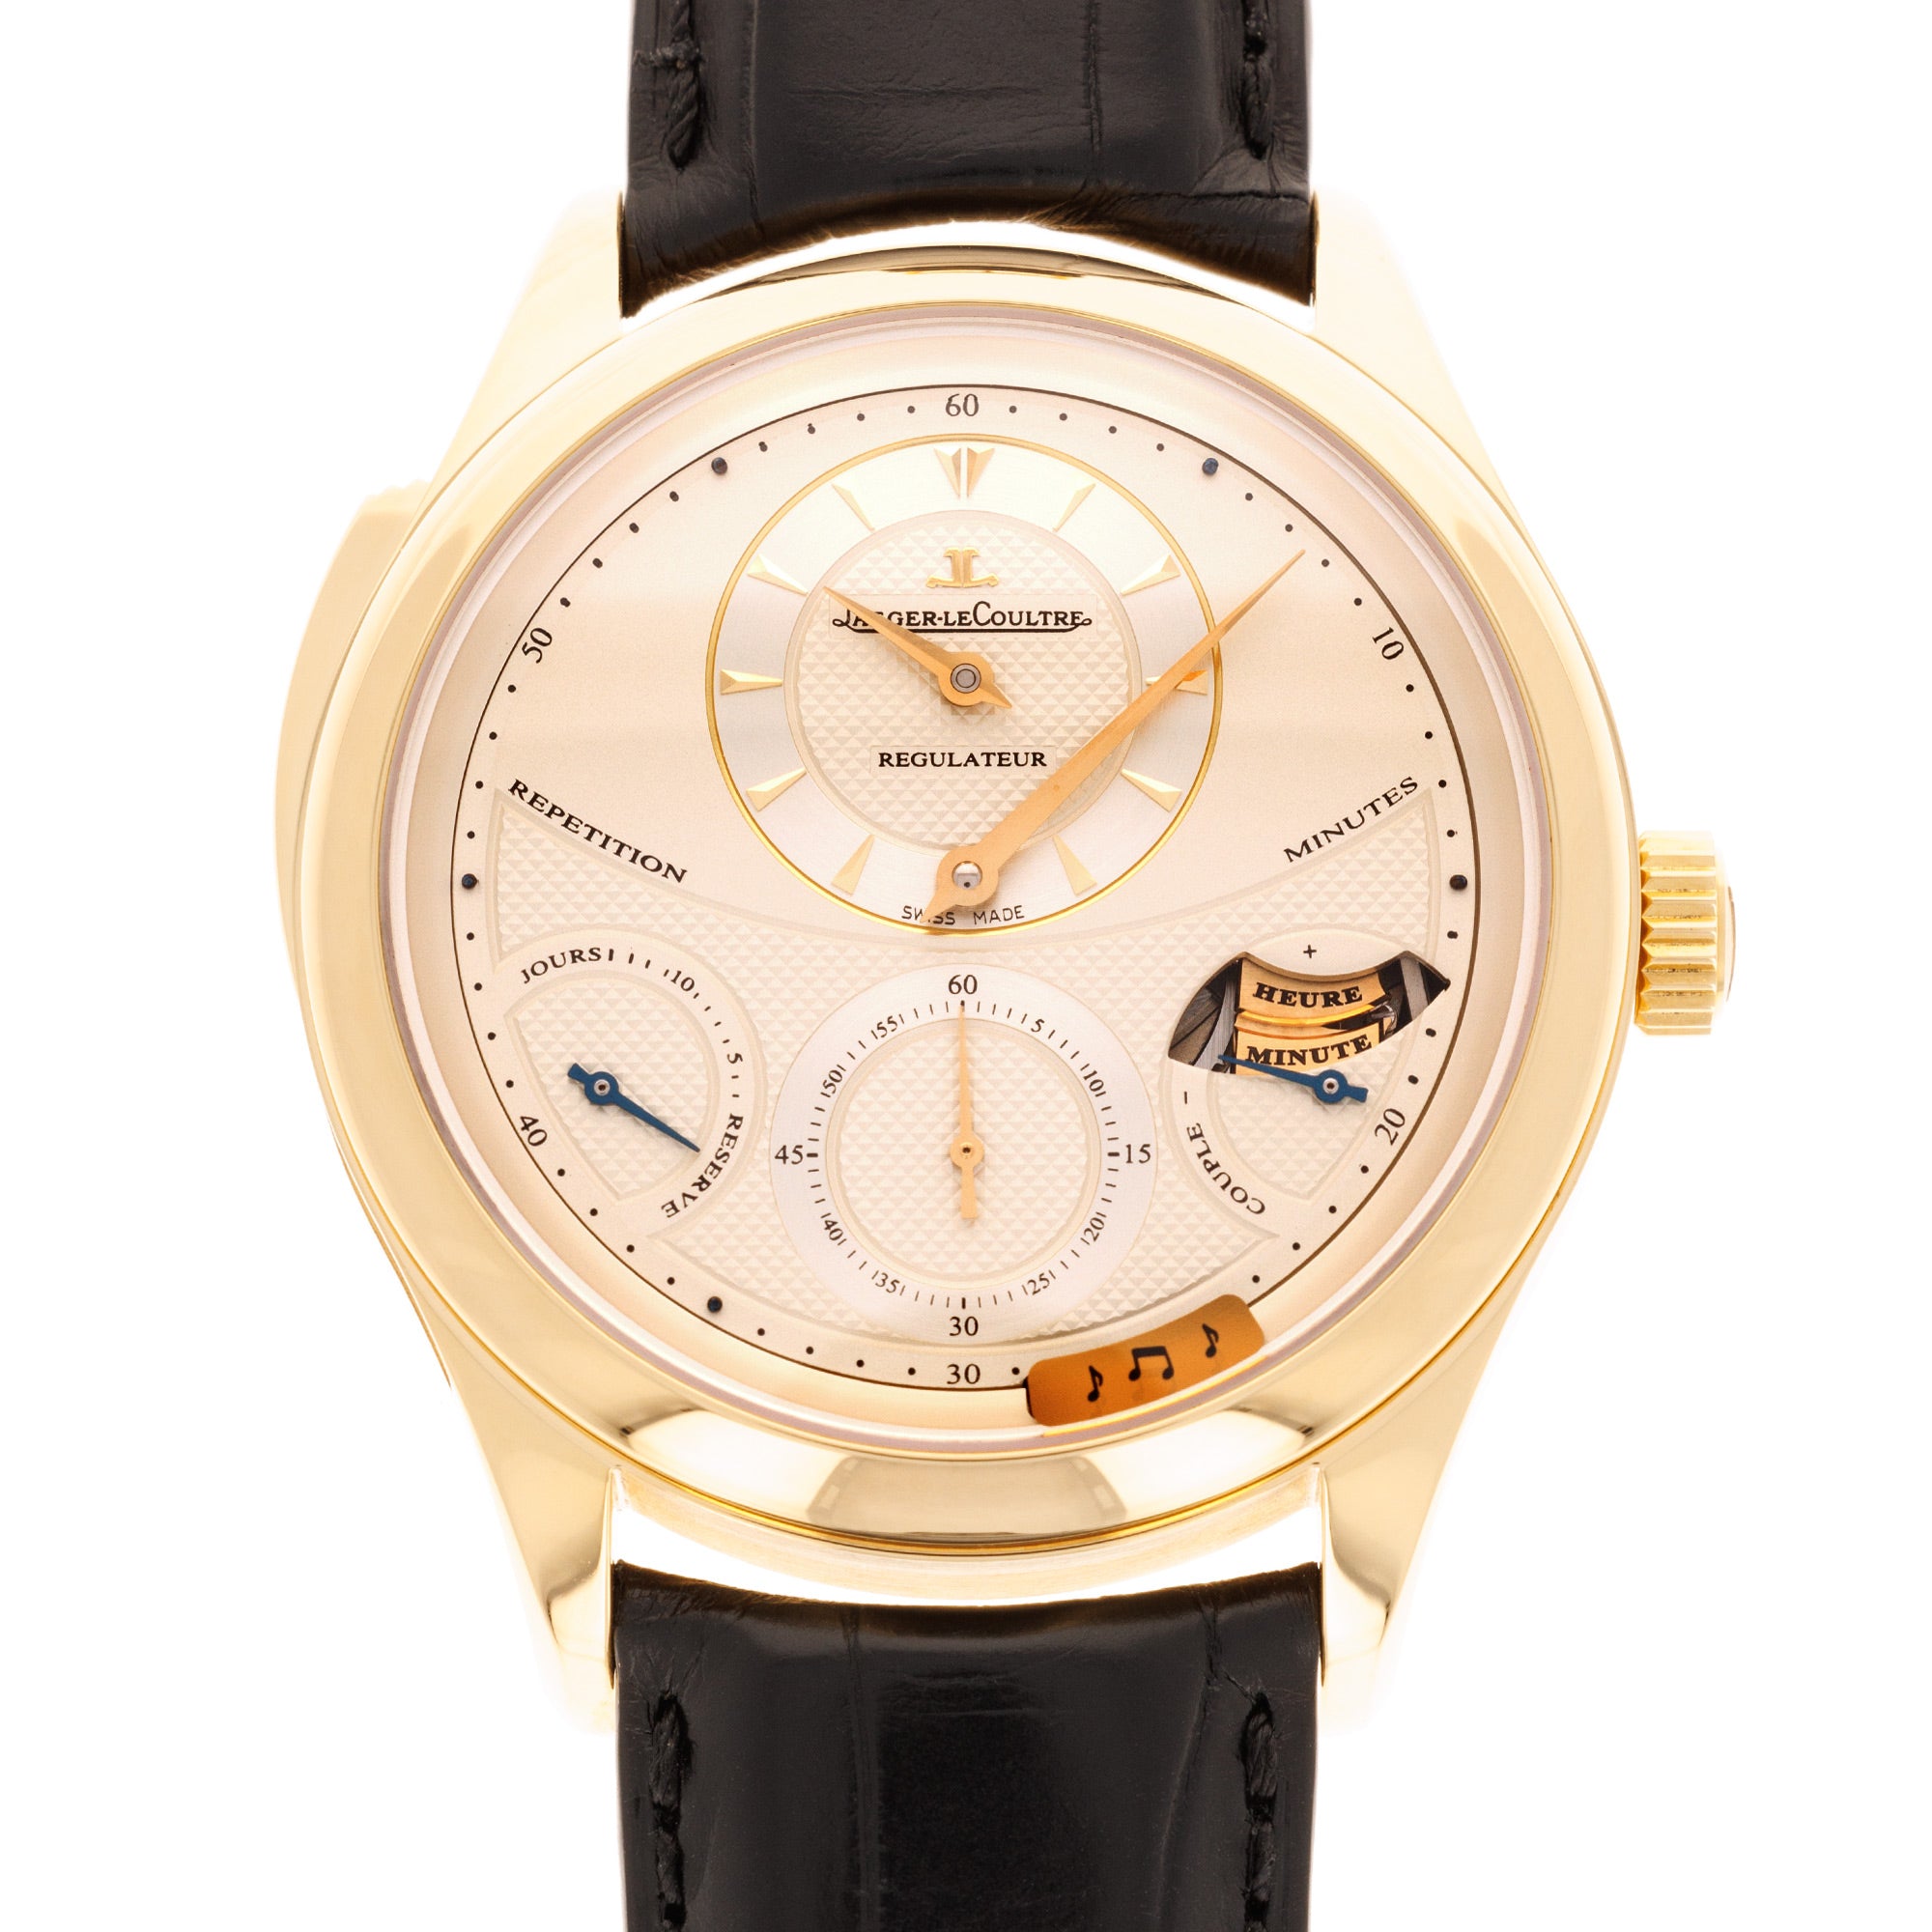 Jaeger LeCoultre - Jaeger LeCoultre Master Grande Minute Repeater Watch Ref. Q5011410, Limited to 100 Pieces - The Keystone Watches